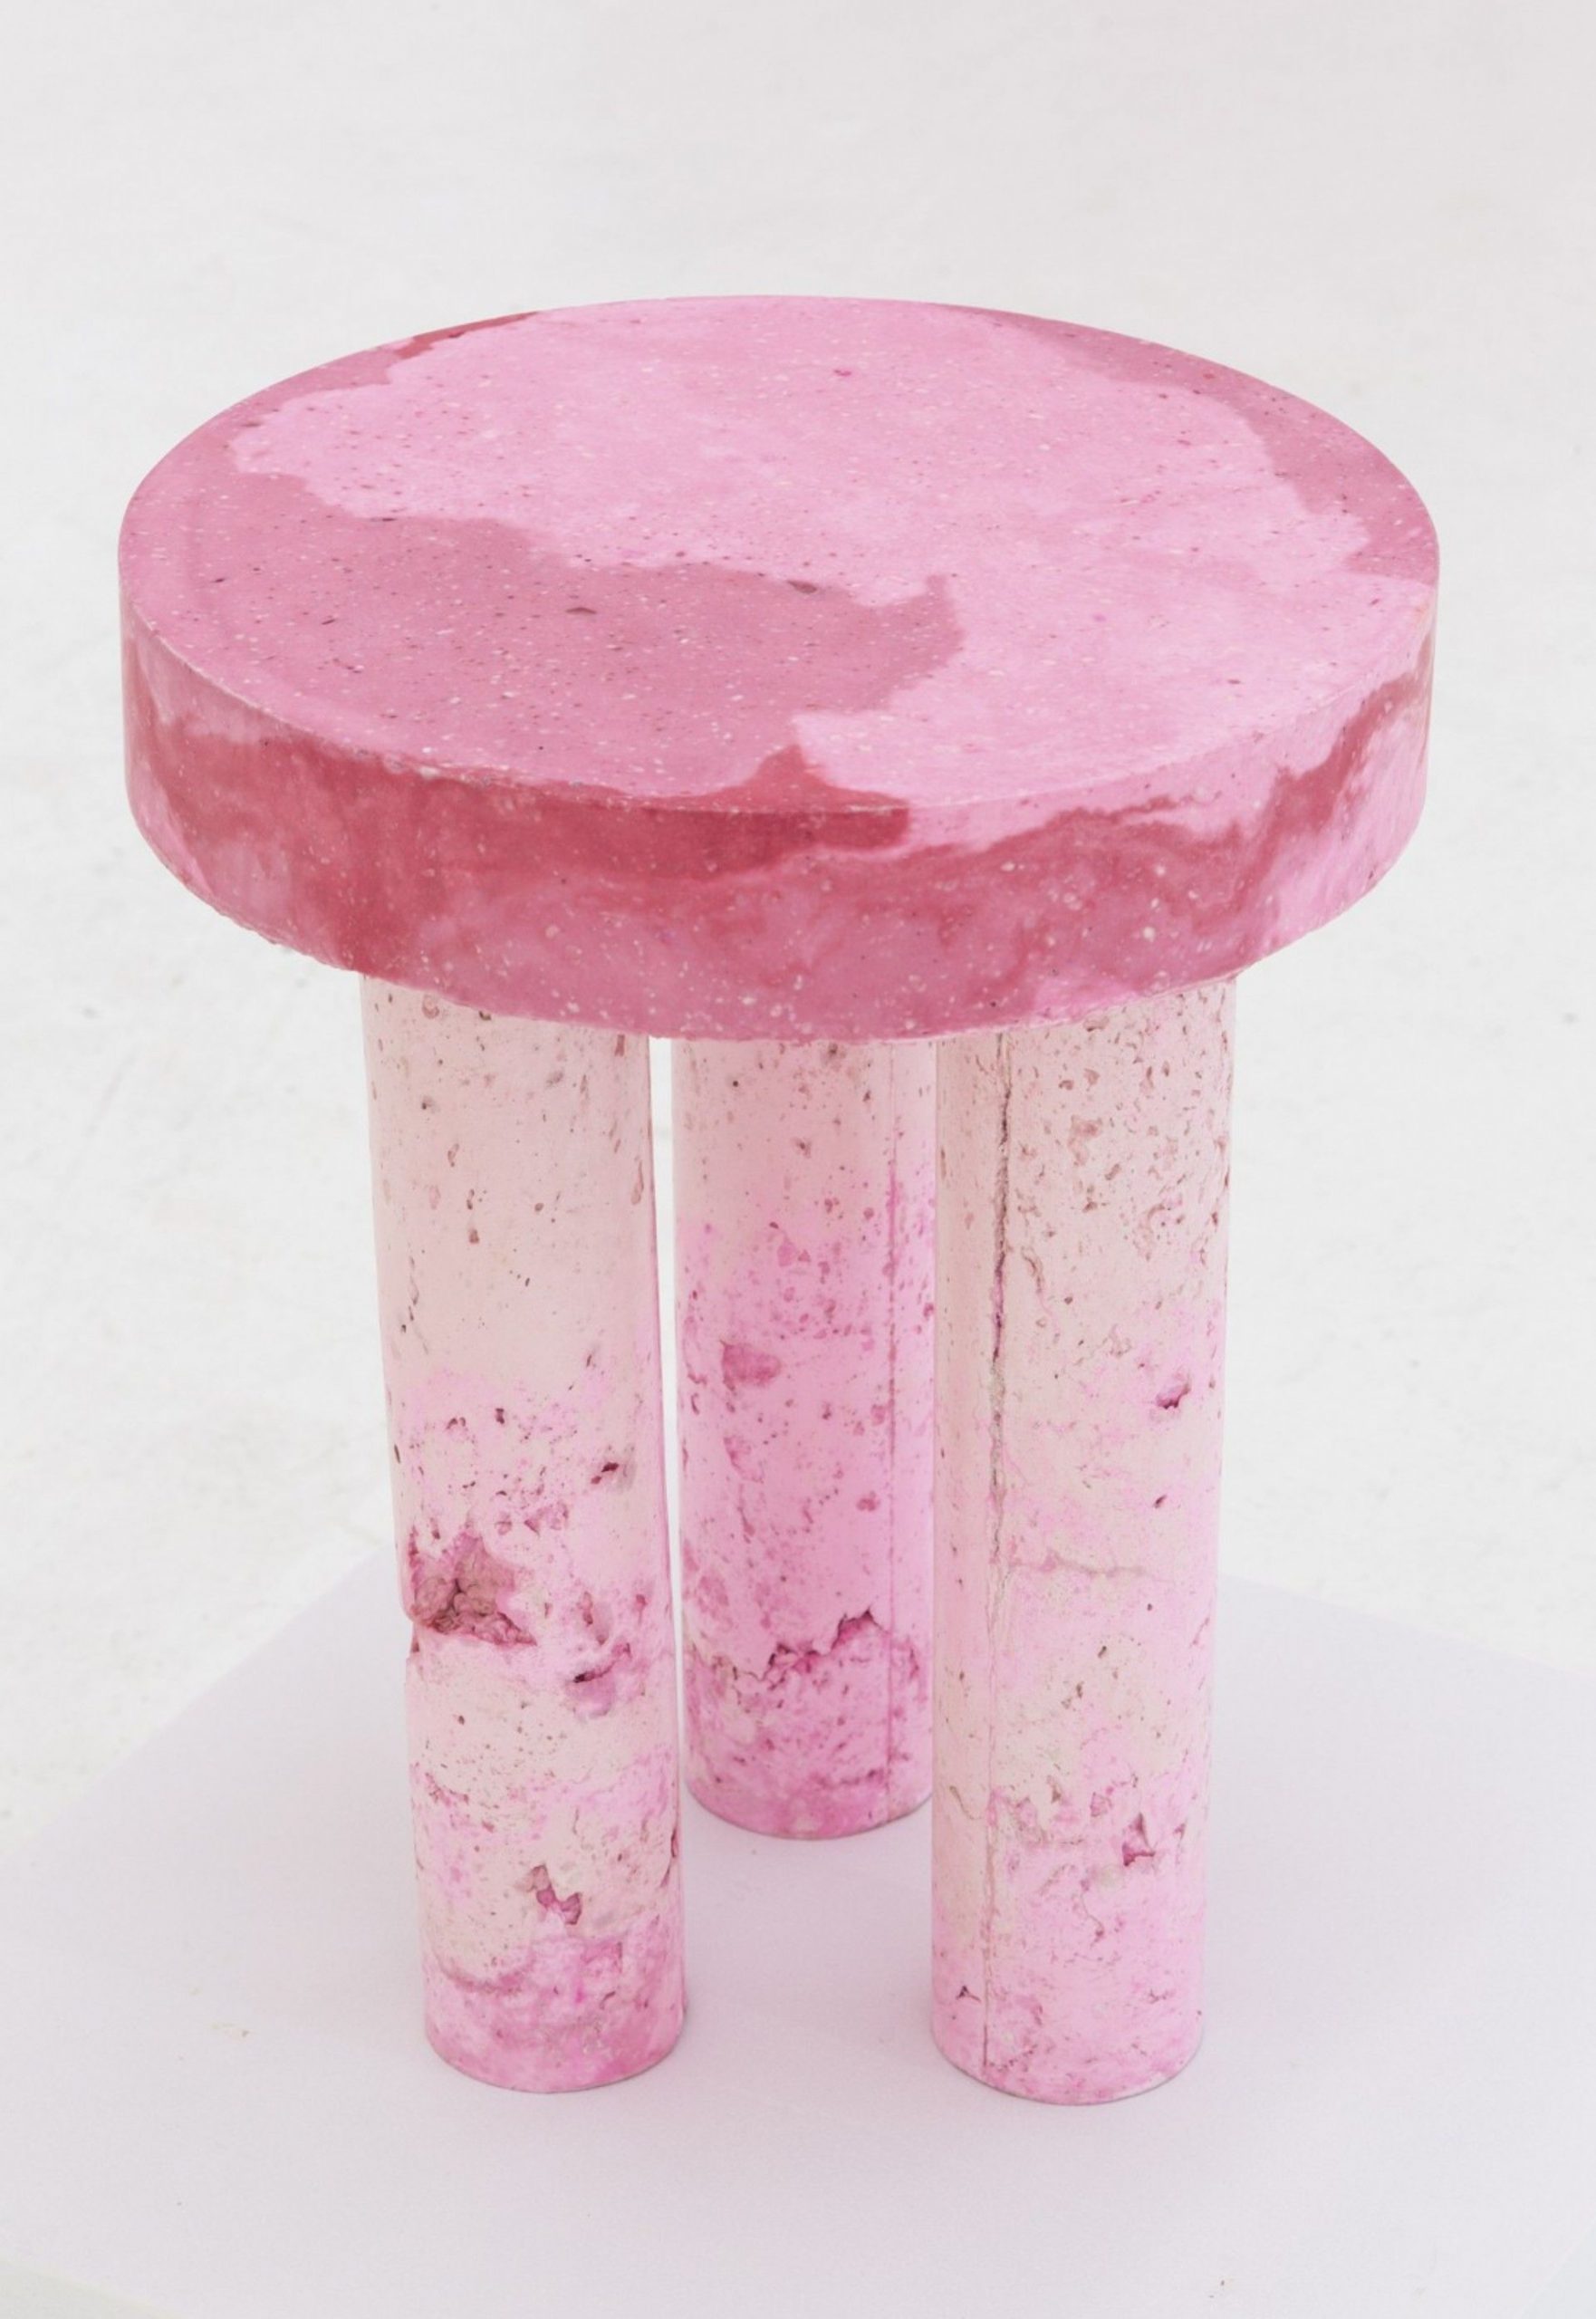 Pink Pulp Table by Katie Stout for exhibition Docile/Domicile/Dandy at Gallery Diet, Miami 2015